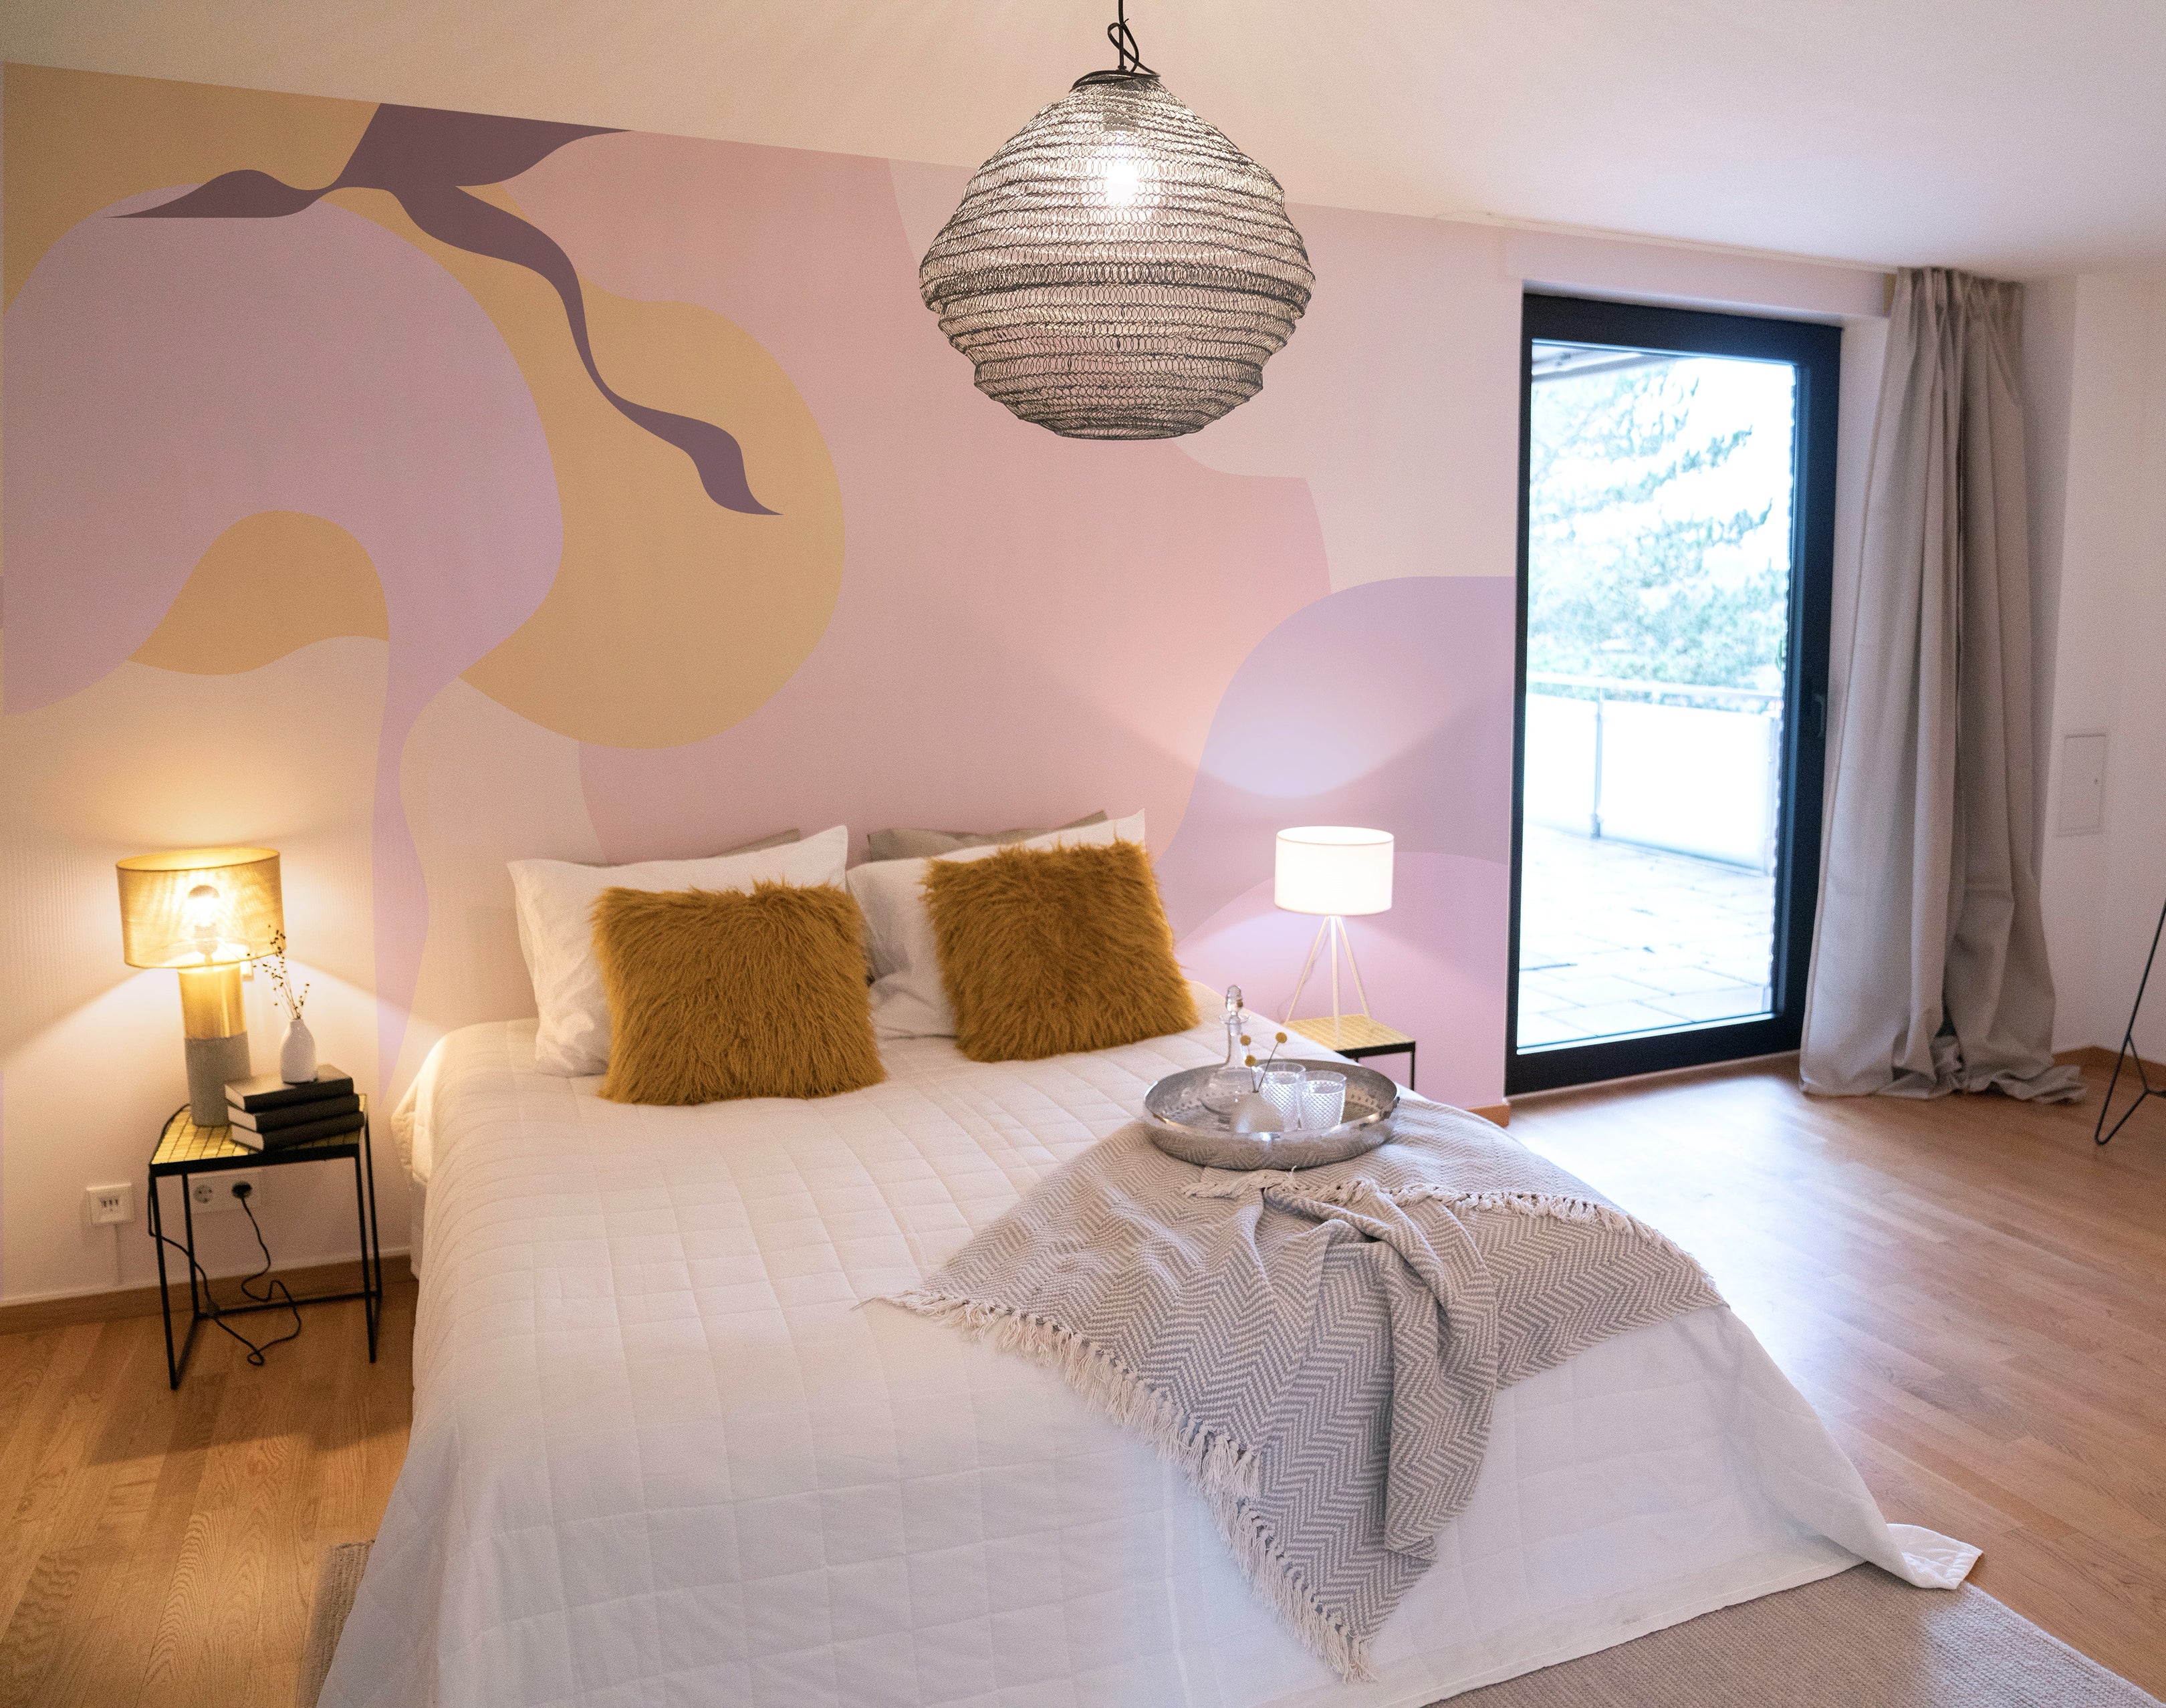 A cozy bedroom setting showcasing the Contemporary Art - Abstract Wall Mural. The mural's soothing palette and fluid abstract design create a tranquil ambiance, enhanced by soft bedding, stylish furnishings, and a direct view to an outdoor terrace.